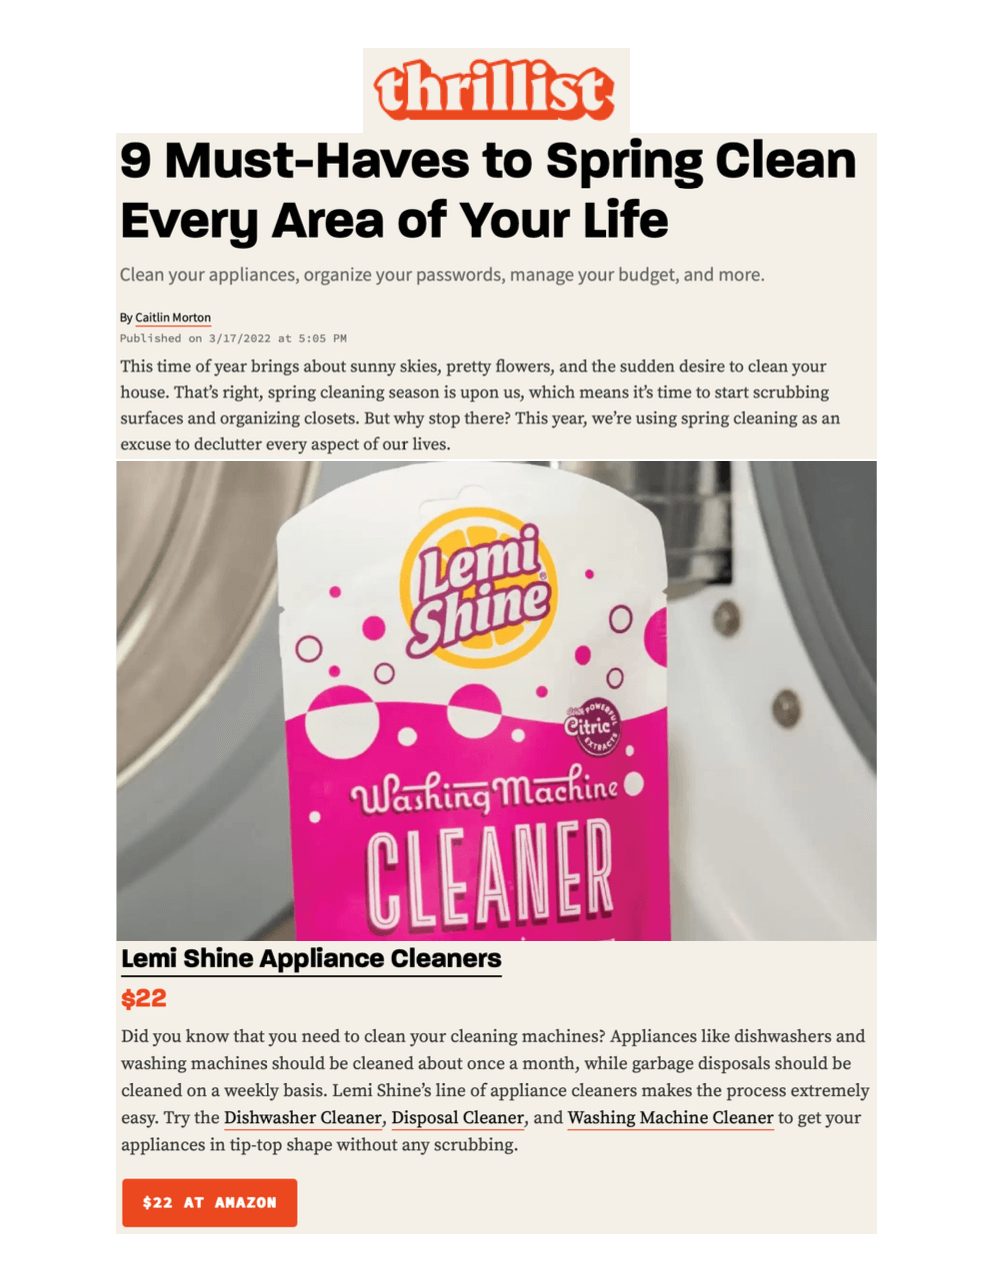 9 Must-Haves to Spring Clean Every Area of Your Life 
Featured Brands include: Lemi Shine

Read More